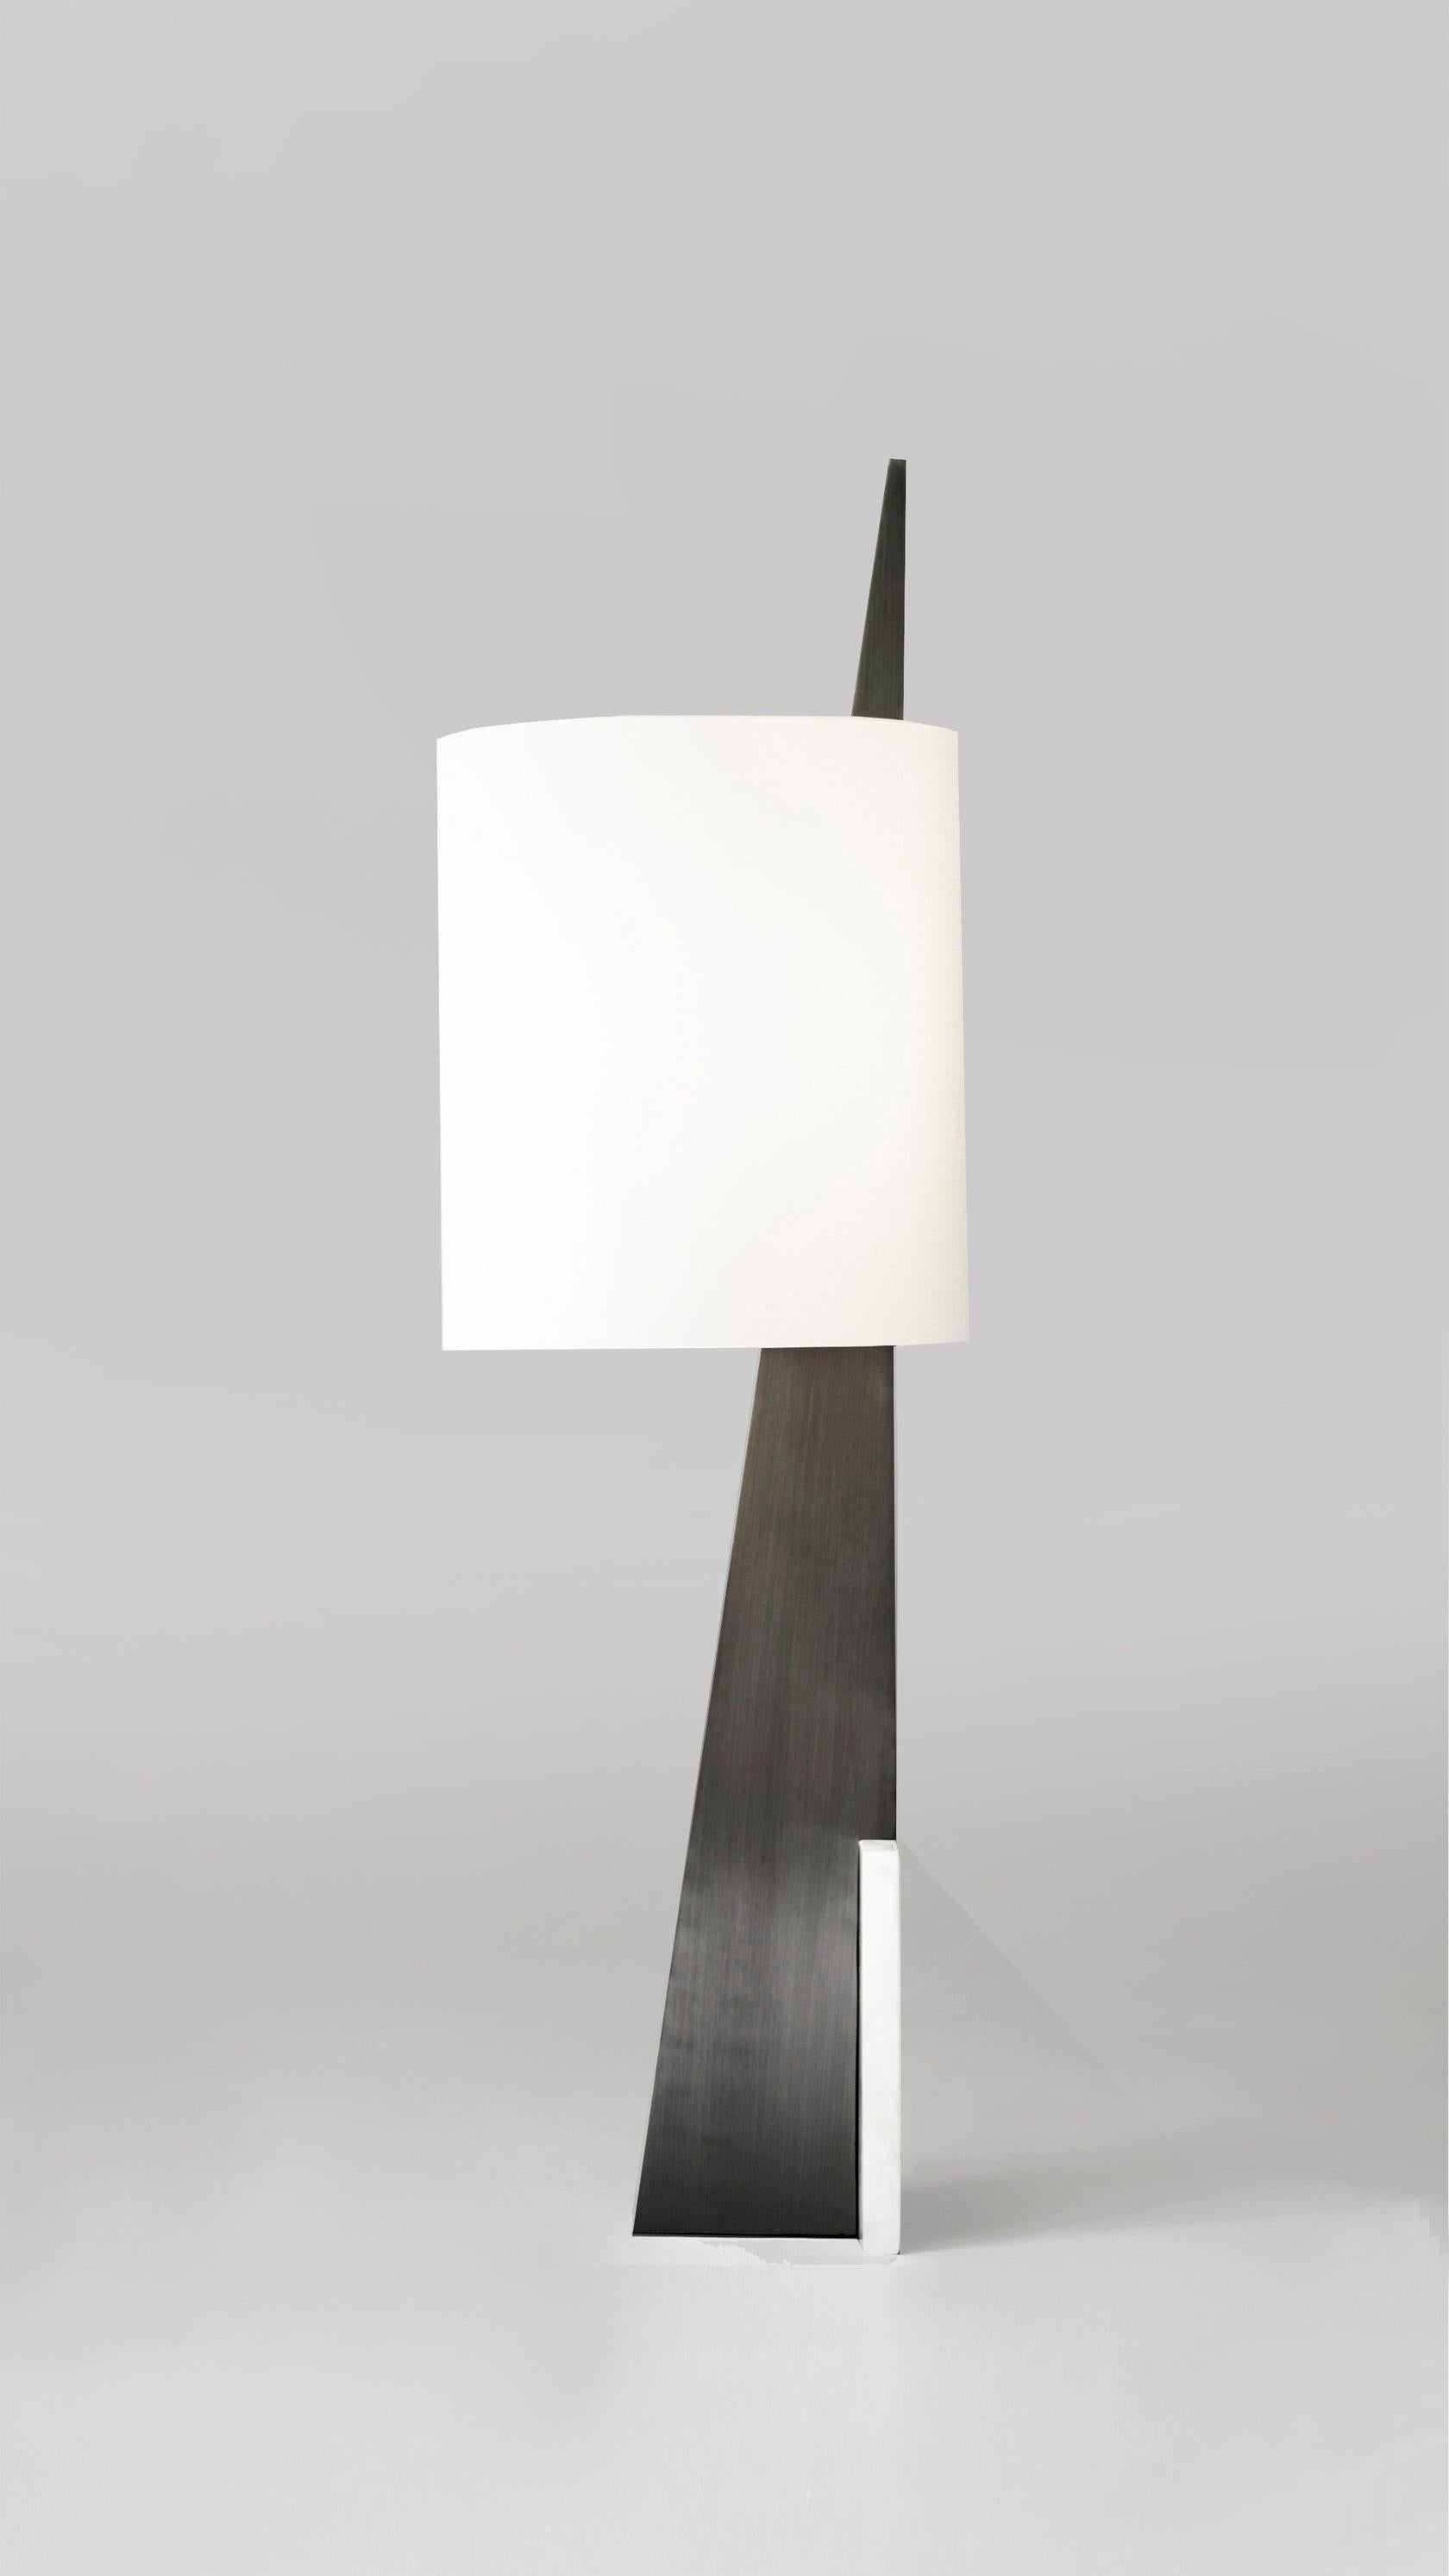 Marble Cut Triangle I Table Lamp by Square in Circle
Dimensions: 30 diameter x 102 height cm
Materials: Brushed brass finish, white frosted glass, dark grey metal  

Inspired by the El Lissitzky poster beat the whites with red wedge, this oversized